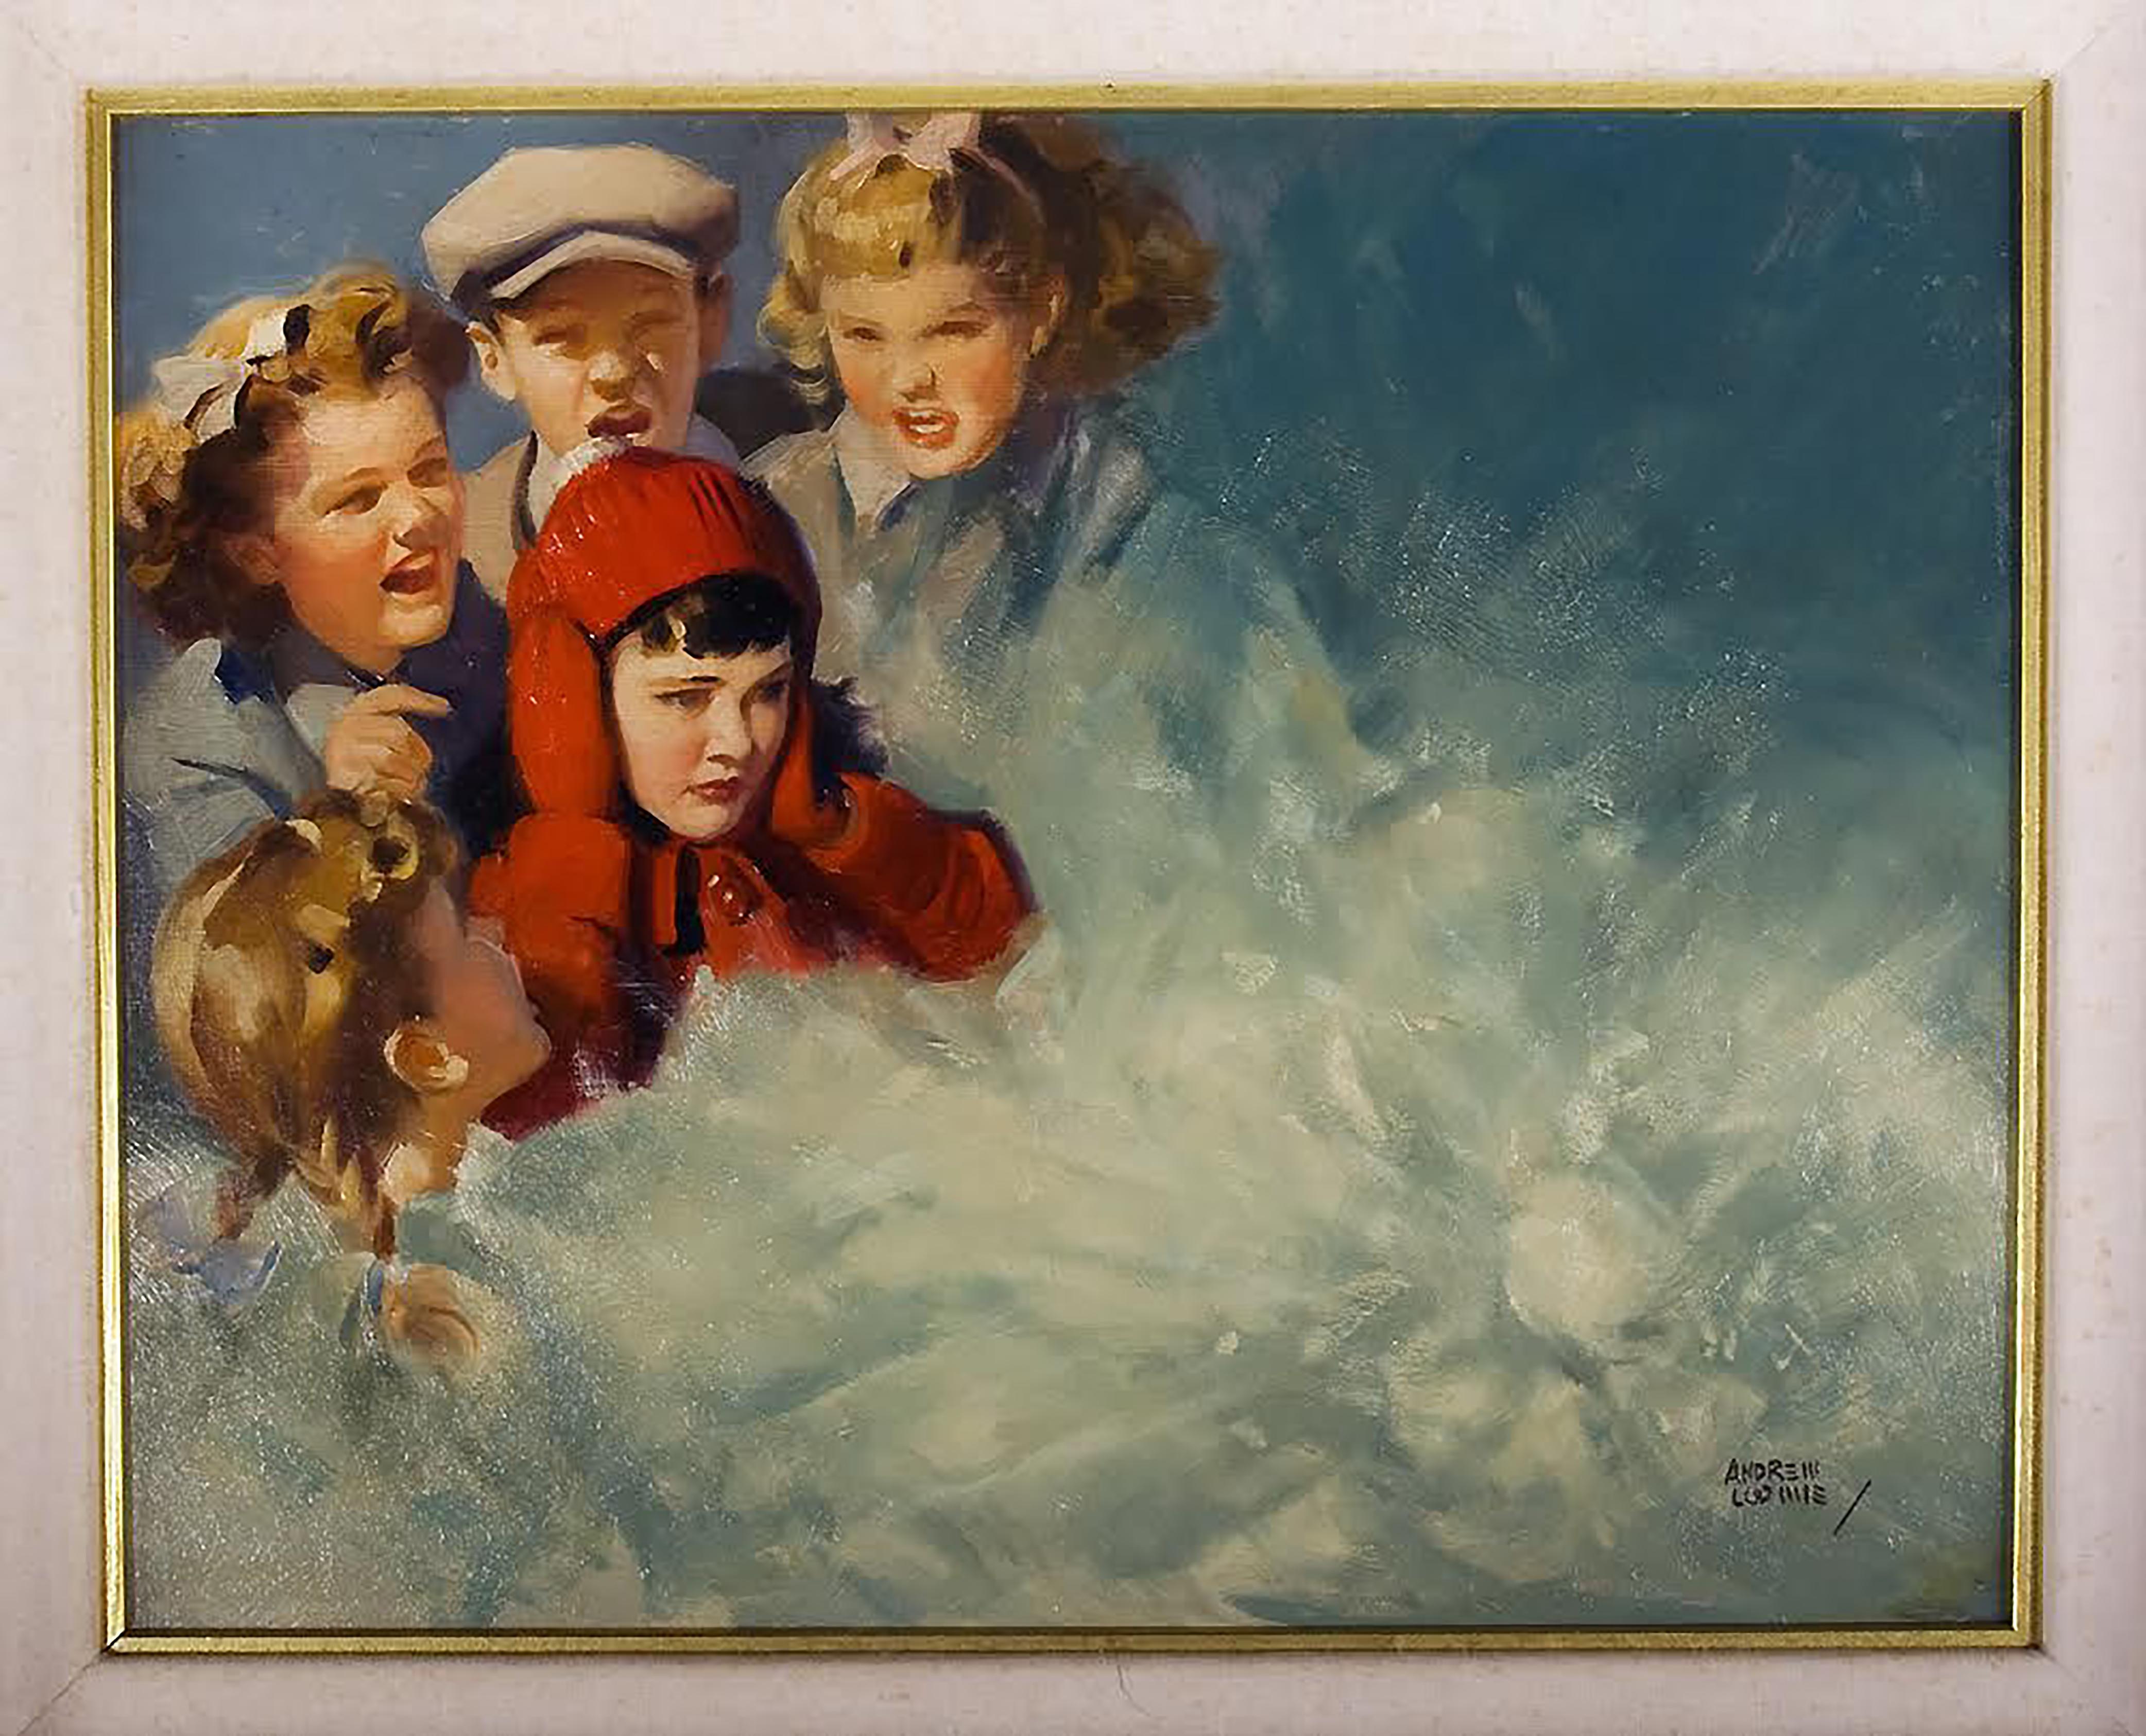 Untitled  - Painting by Andrew Loomis